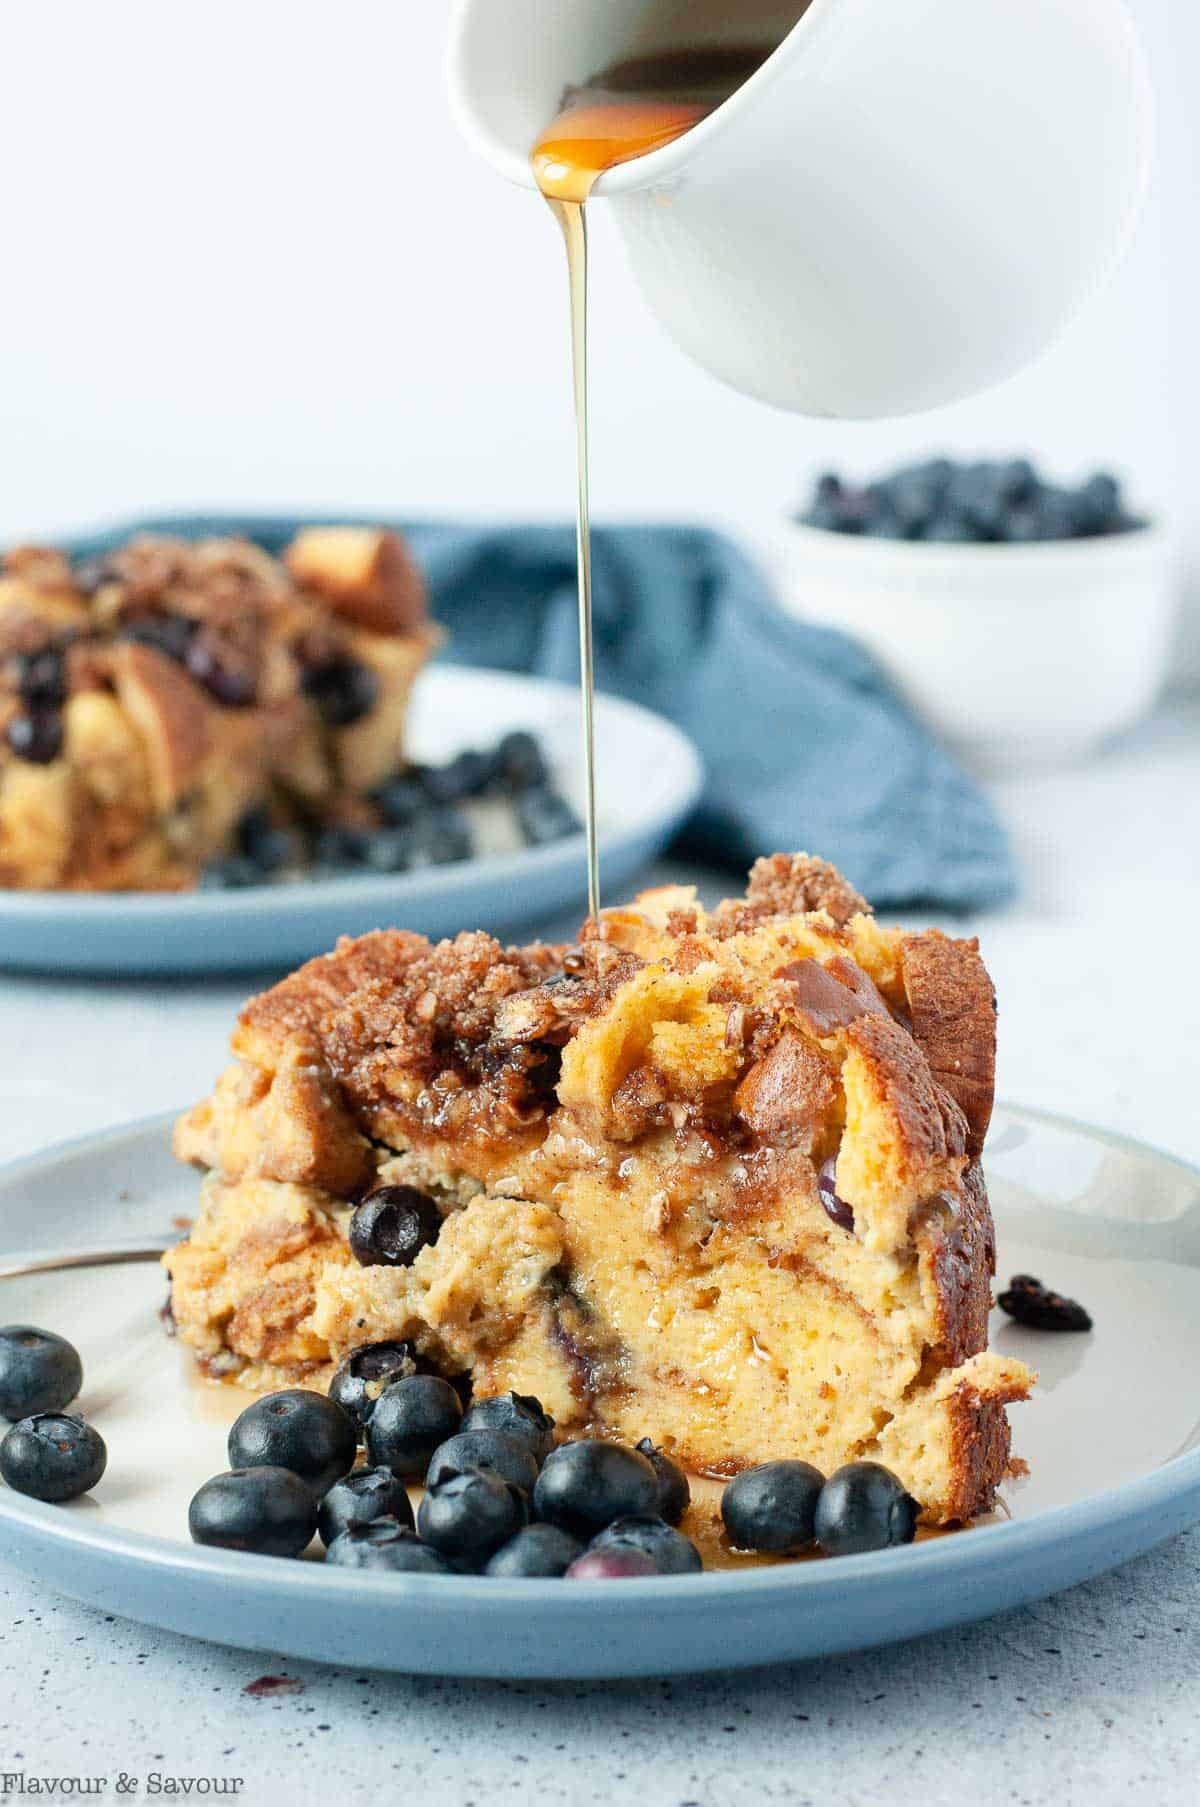 Drizzling maple syrup on Blueberry French Toast Casserole